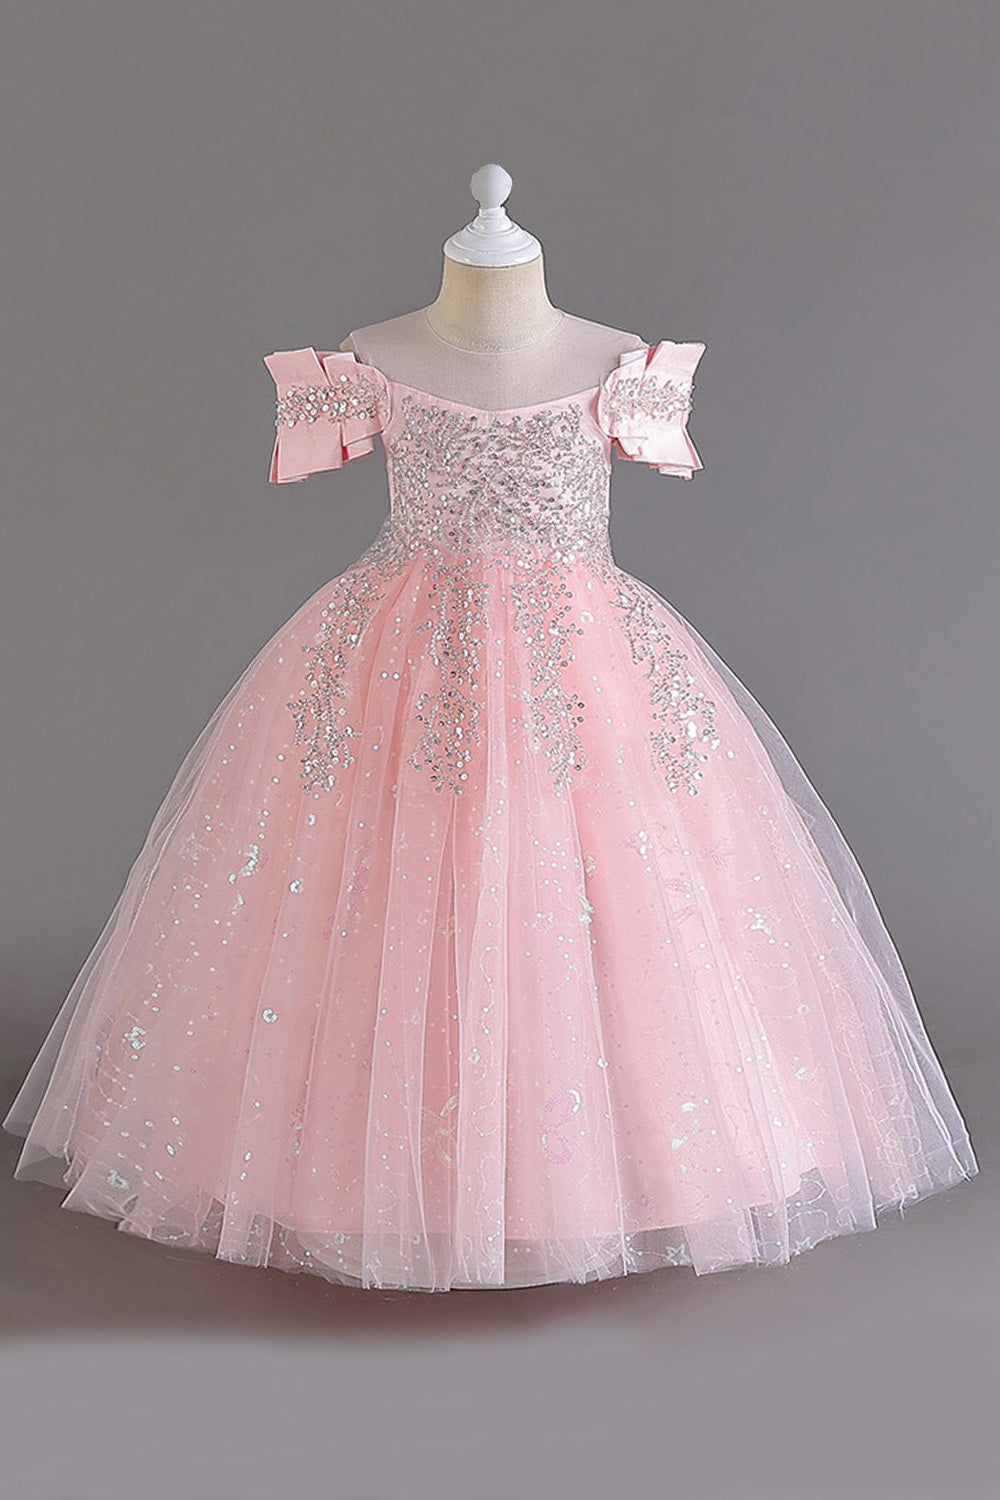 Pink Off the Shoulder A Line Flower Girl Dress with Bow